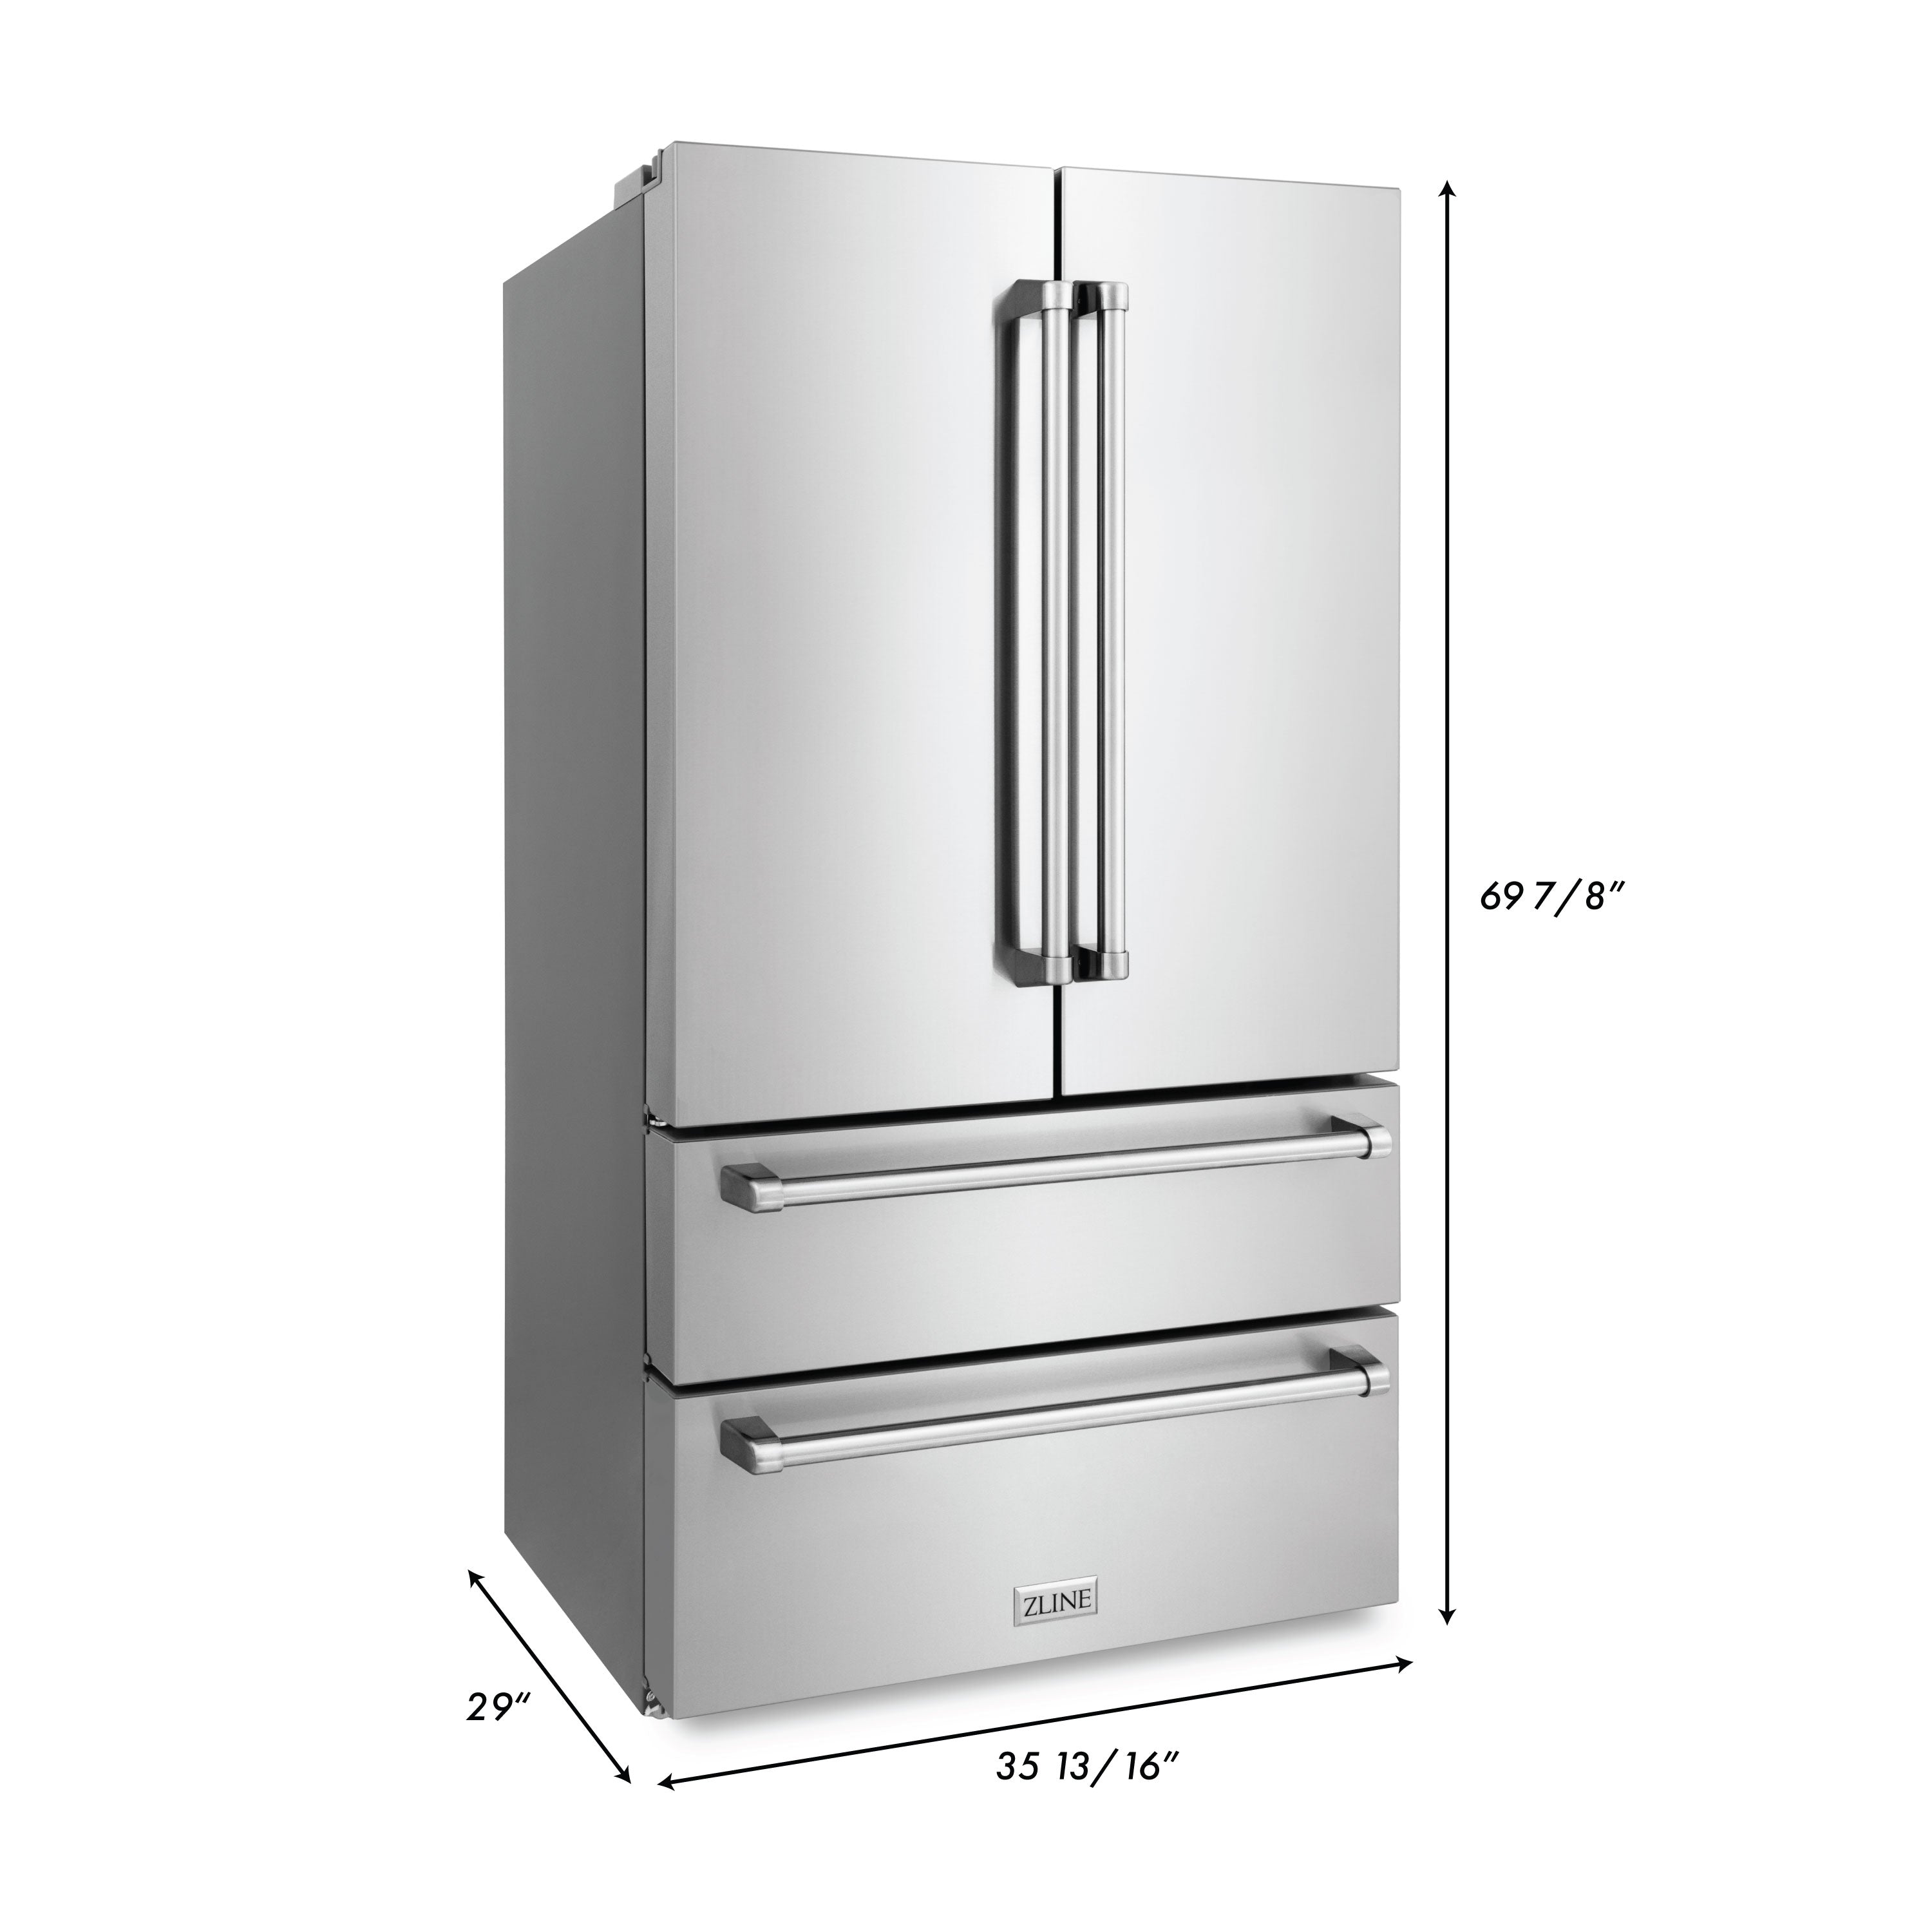 ZLINE Stainless Steel Refrigerator with Freestanding French Doors & Ice Maker - 36-Inch, 22.5 Cu. Ft. 9